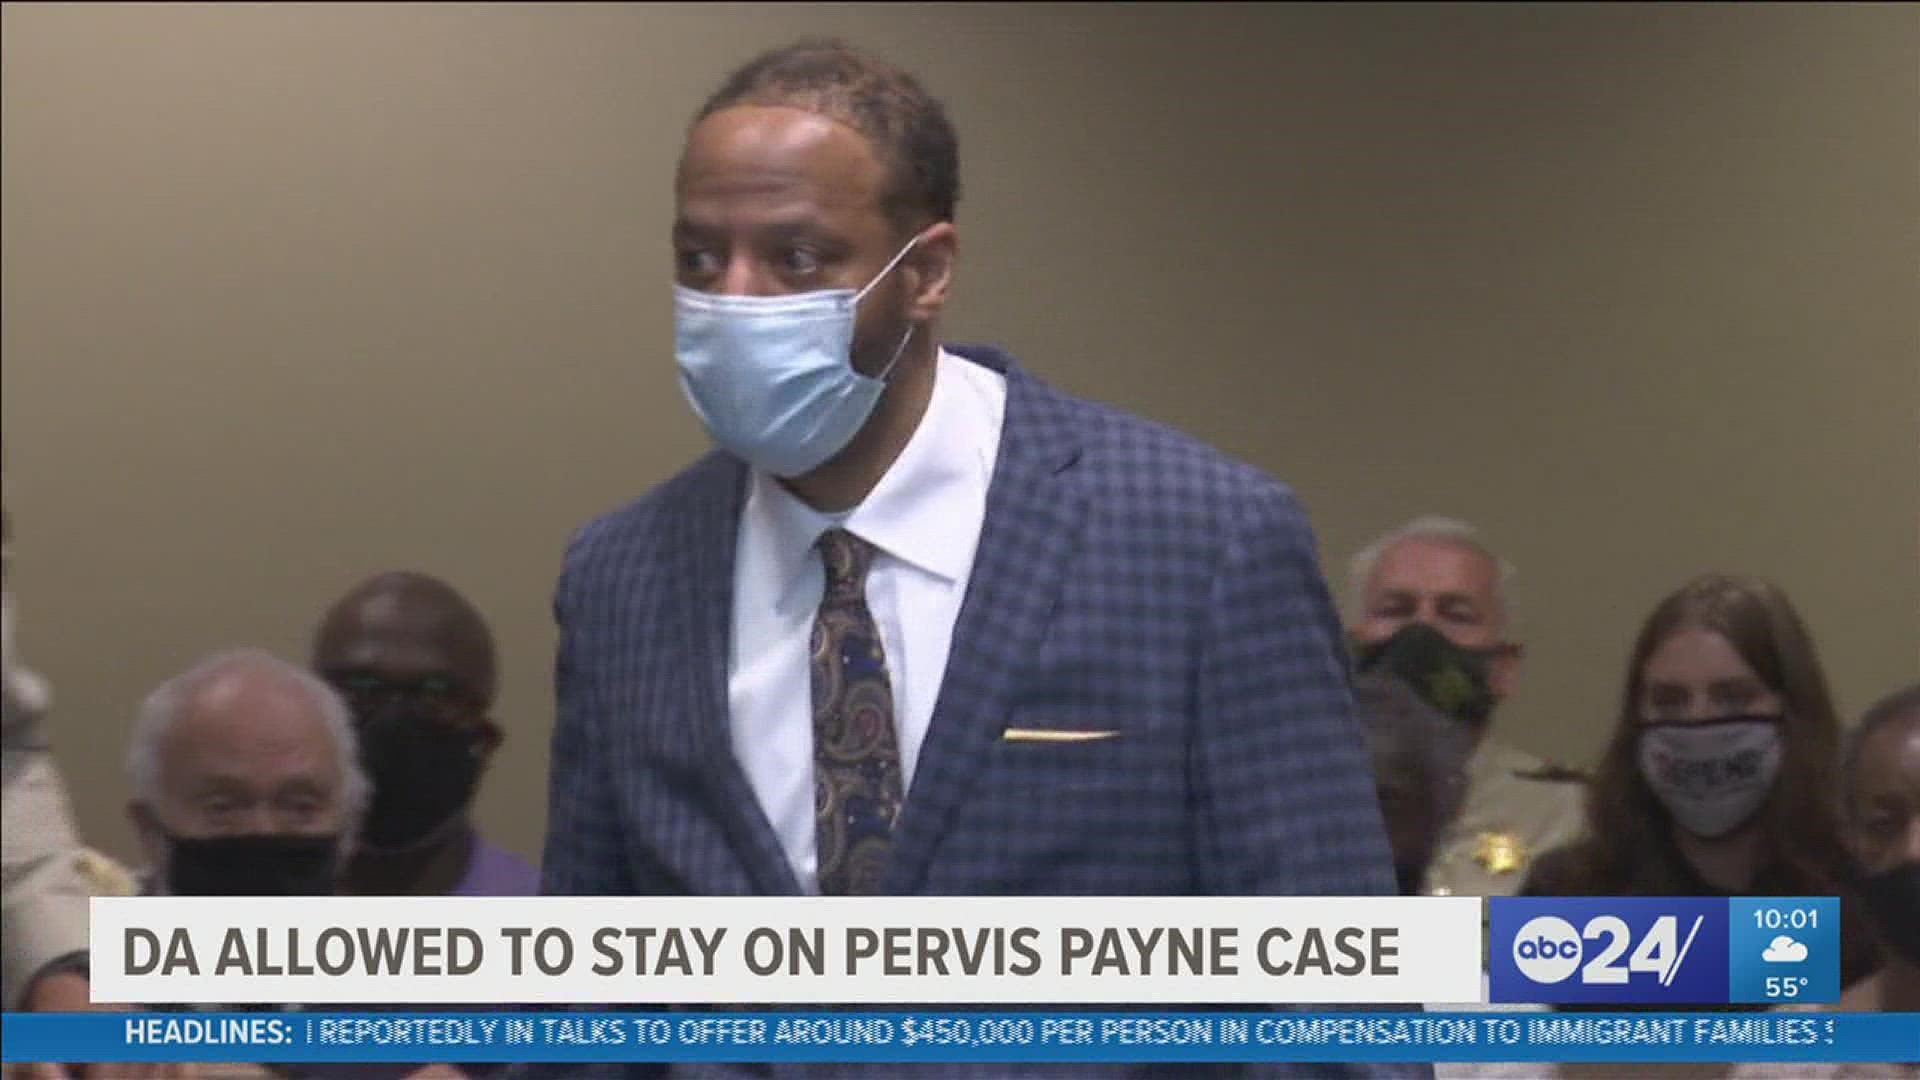 Payne is scheduled to reappear in court in December.